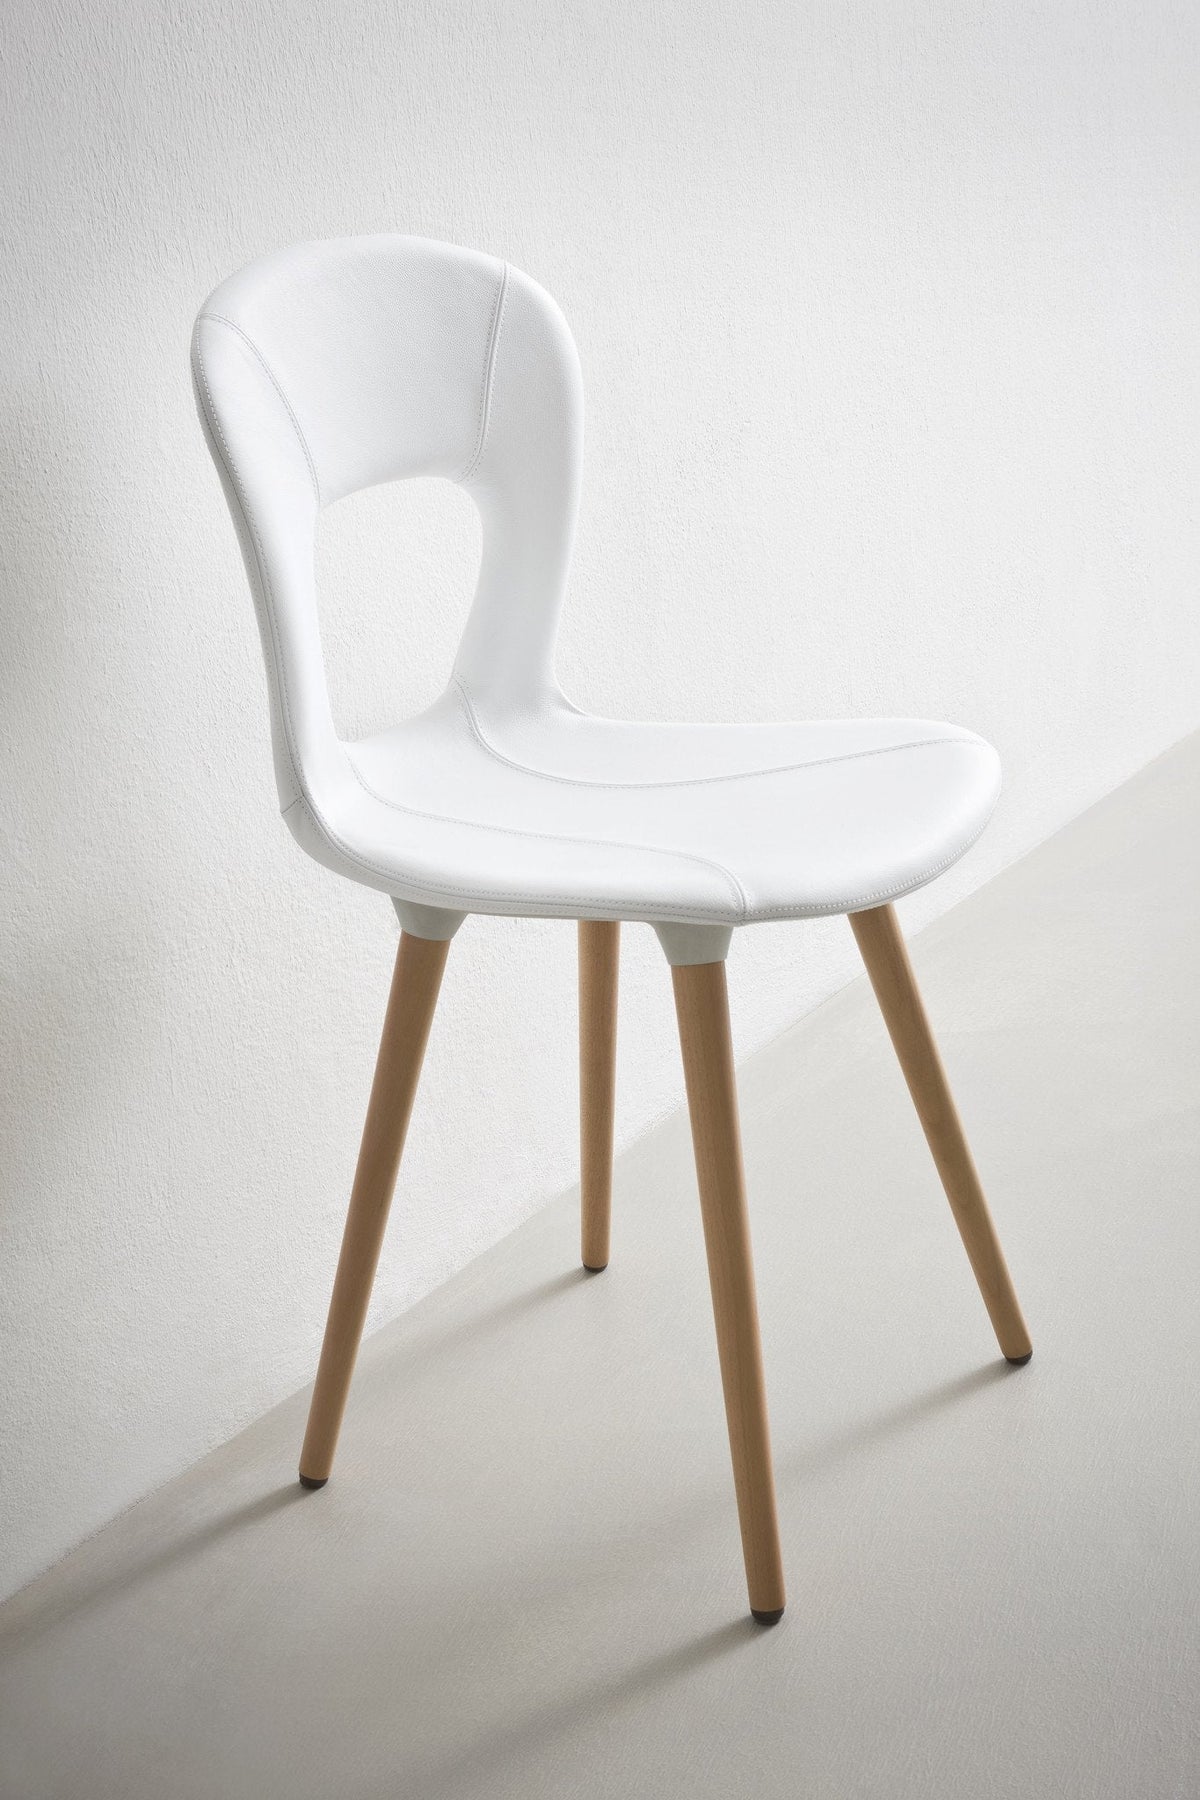 Blog Side Chair c/w Wood Legs-Gaber-Contract Furniture Store